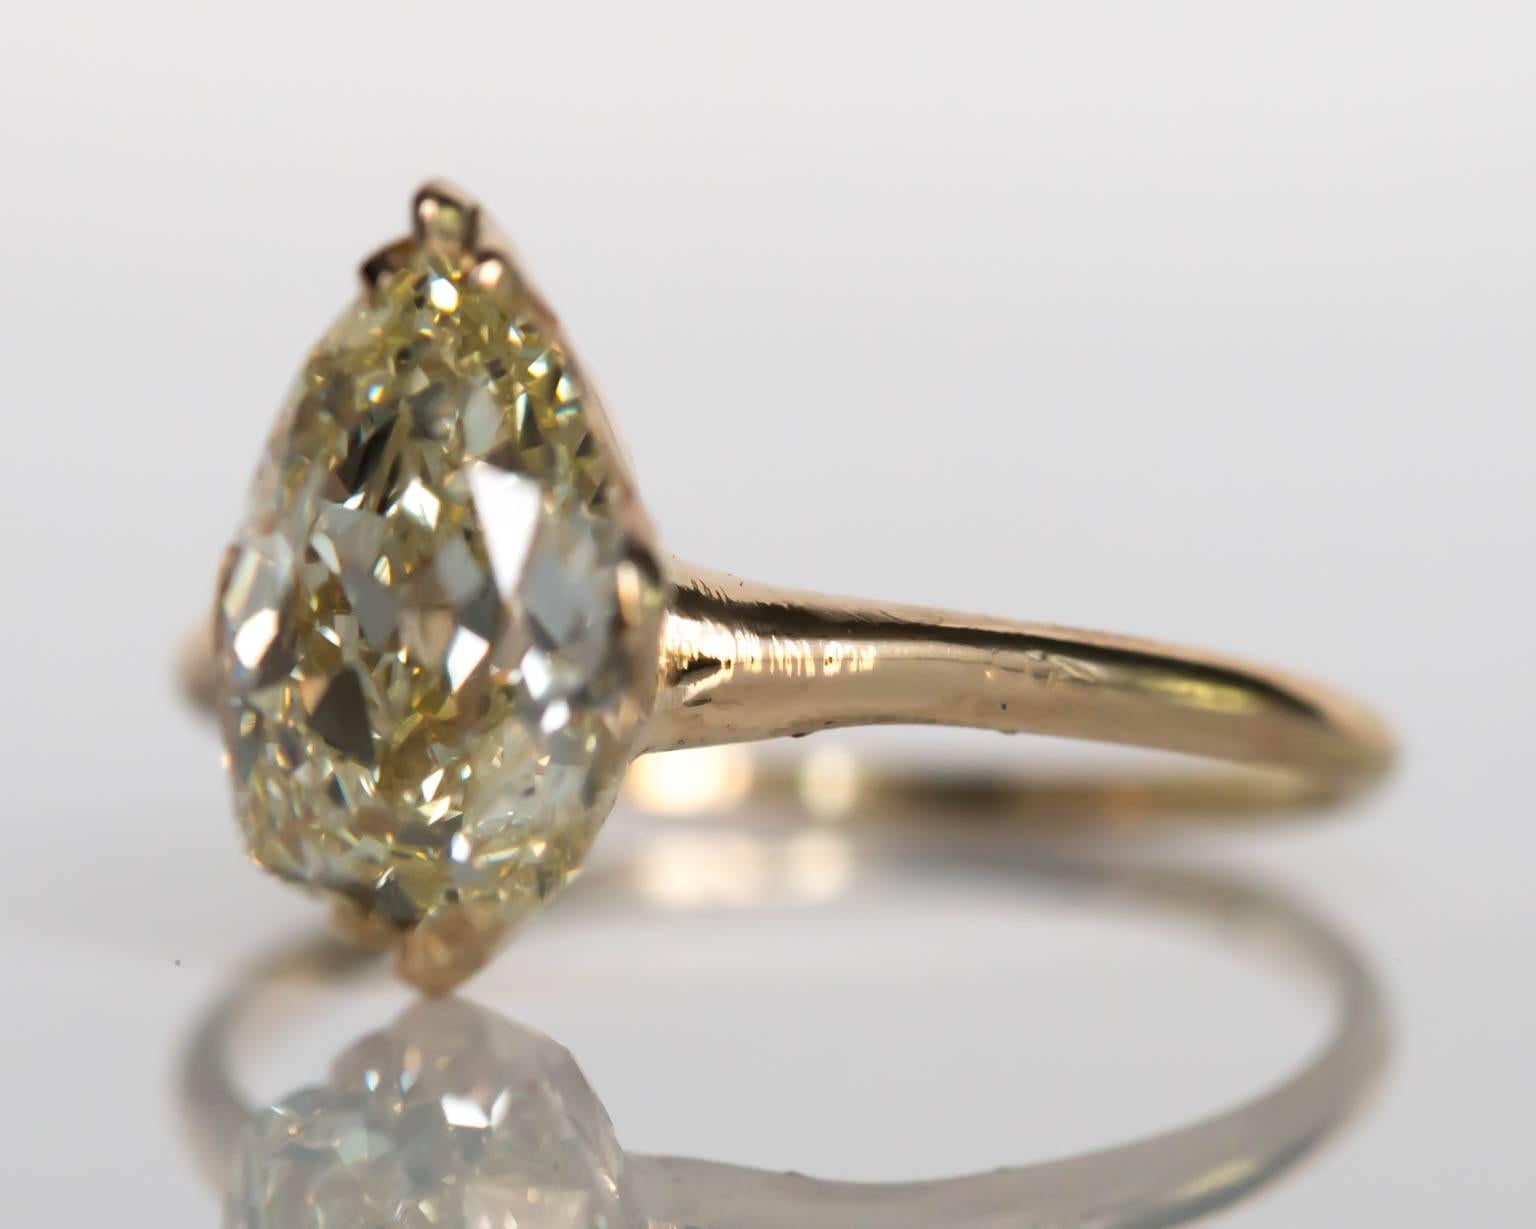 Item Details: 
Ring Size: 7.5
Metal Type: 14 Karat Yellow Gold 
Weight: 2.7 grams

Center Diamond Details
GIA CERTIFIED Center Diamond - Certificate #2185218701
Shape: Pear Brilliant
Carat Weight: 2.13 carat
Color: N
Clarity: VS1


Finger to Top of